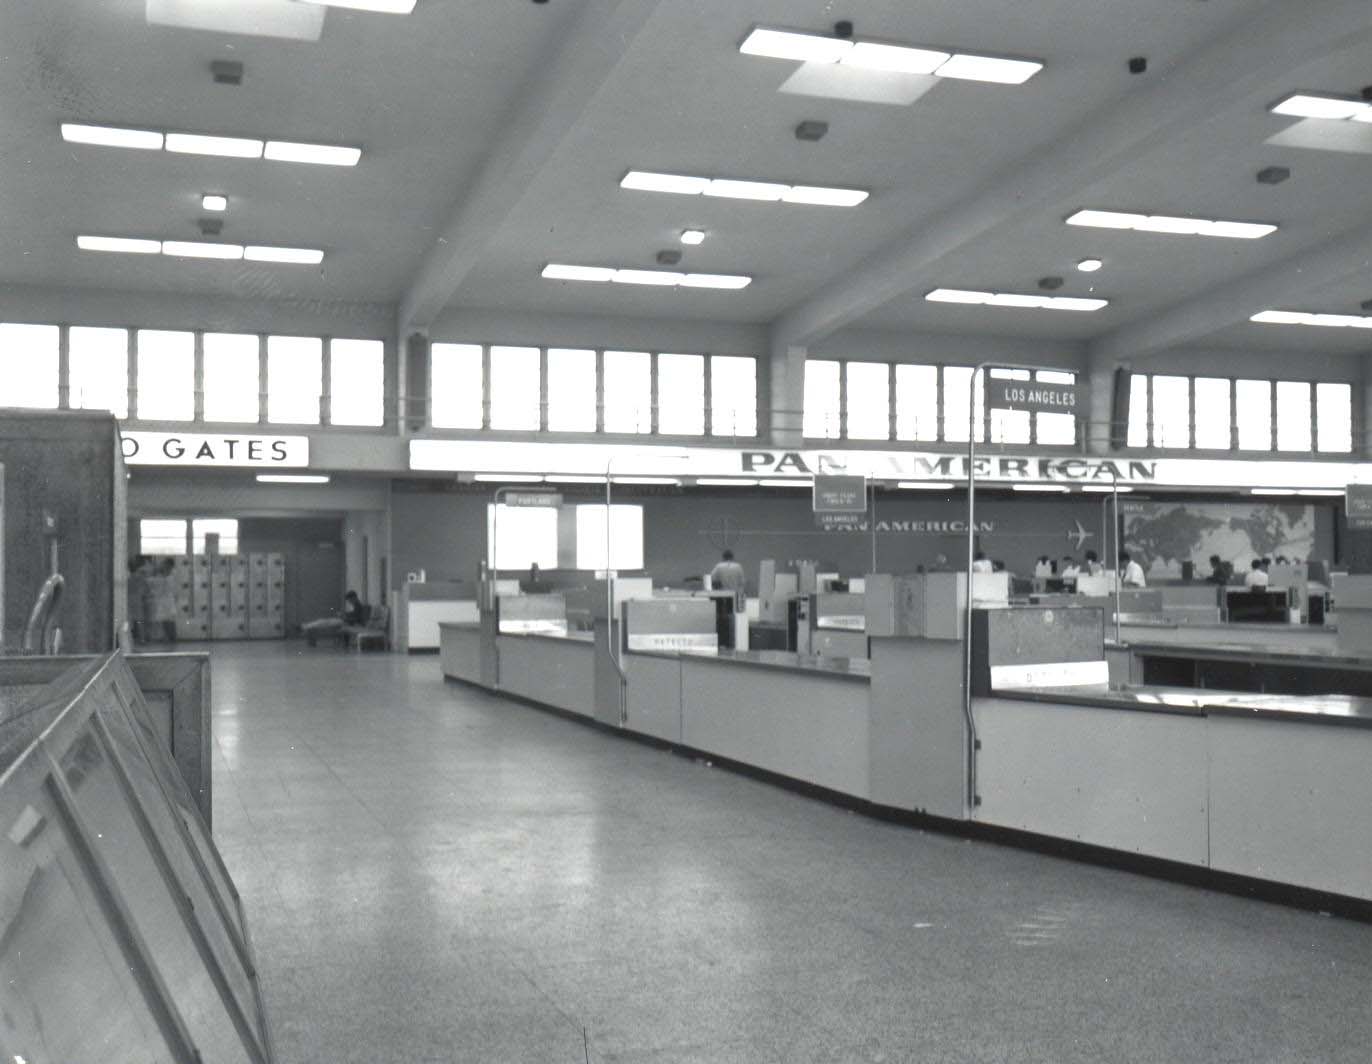 Pan American Airways Ticket Lobby, Honolulu International Airport, 1960. (Image credit: Hawaii Department of Transportation, Airports Division) (CLICK TO ENLARGE)